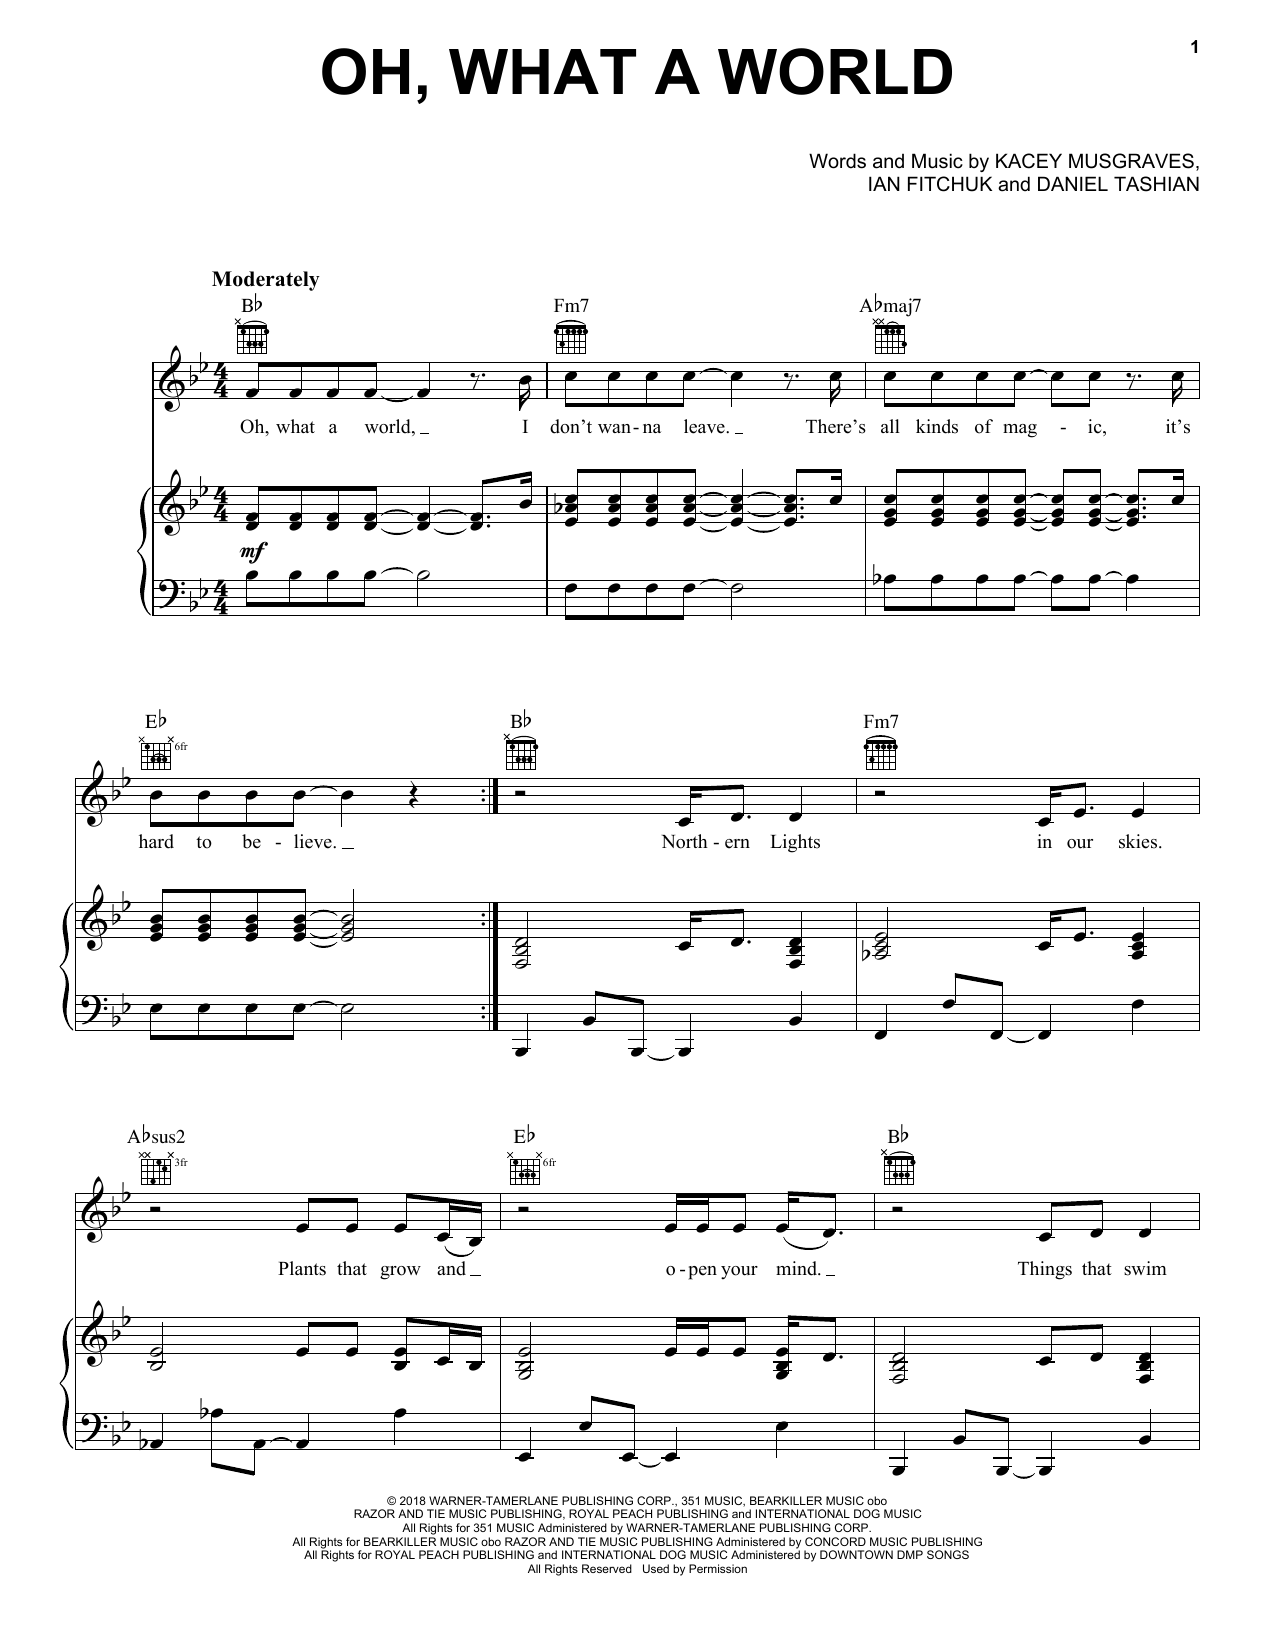 Download Kacey Musgraves Oh, What A World Sheet Music